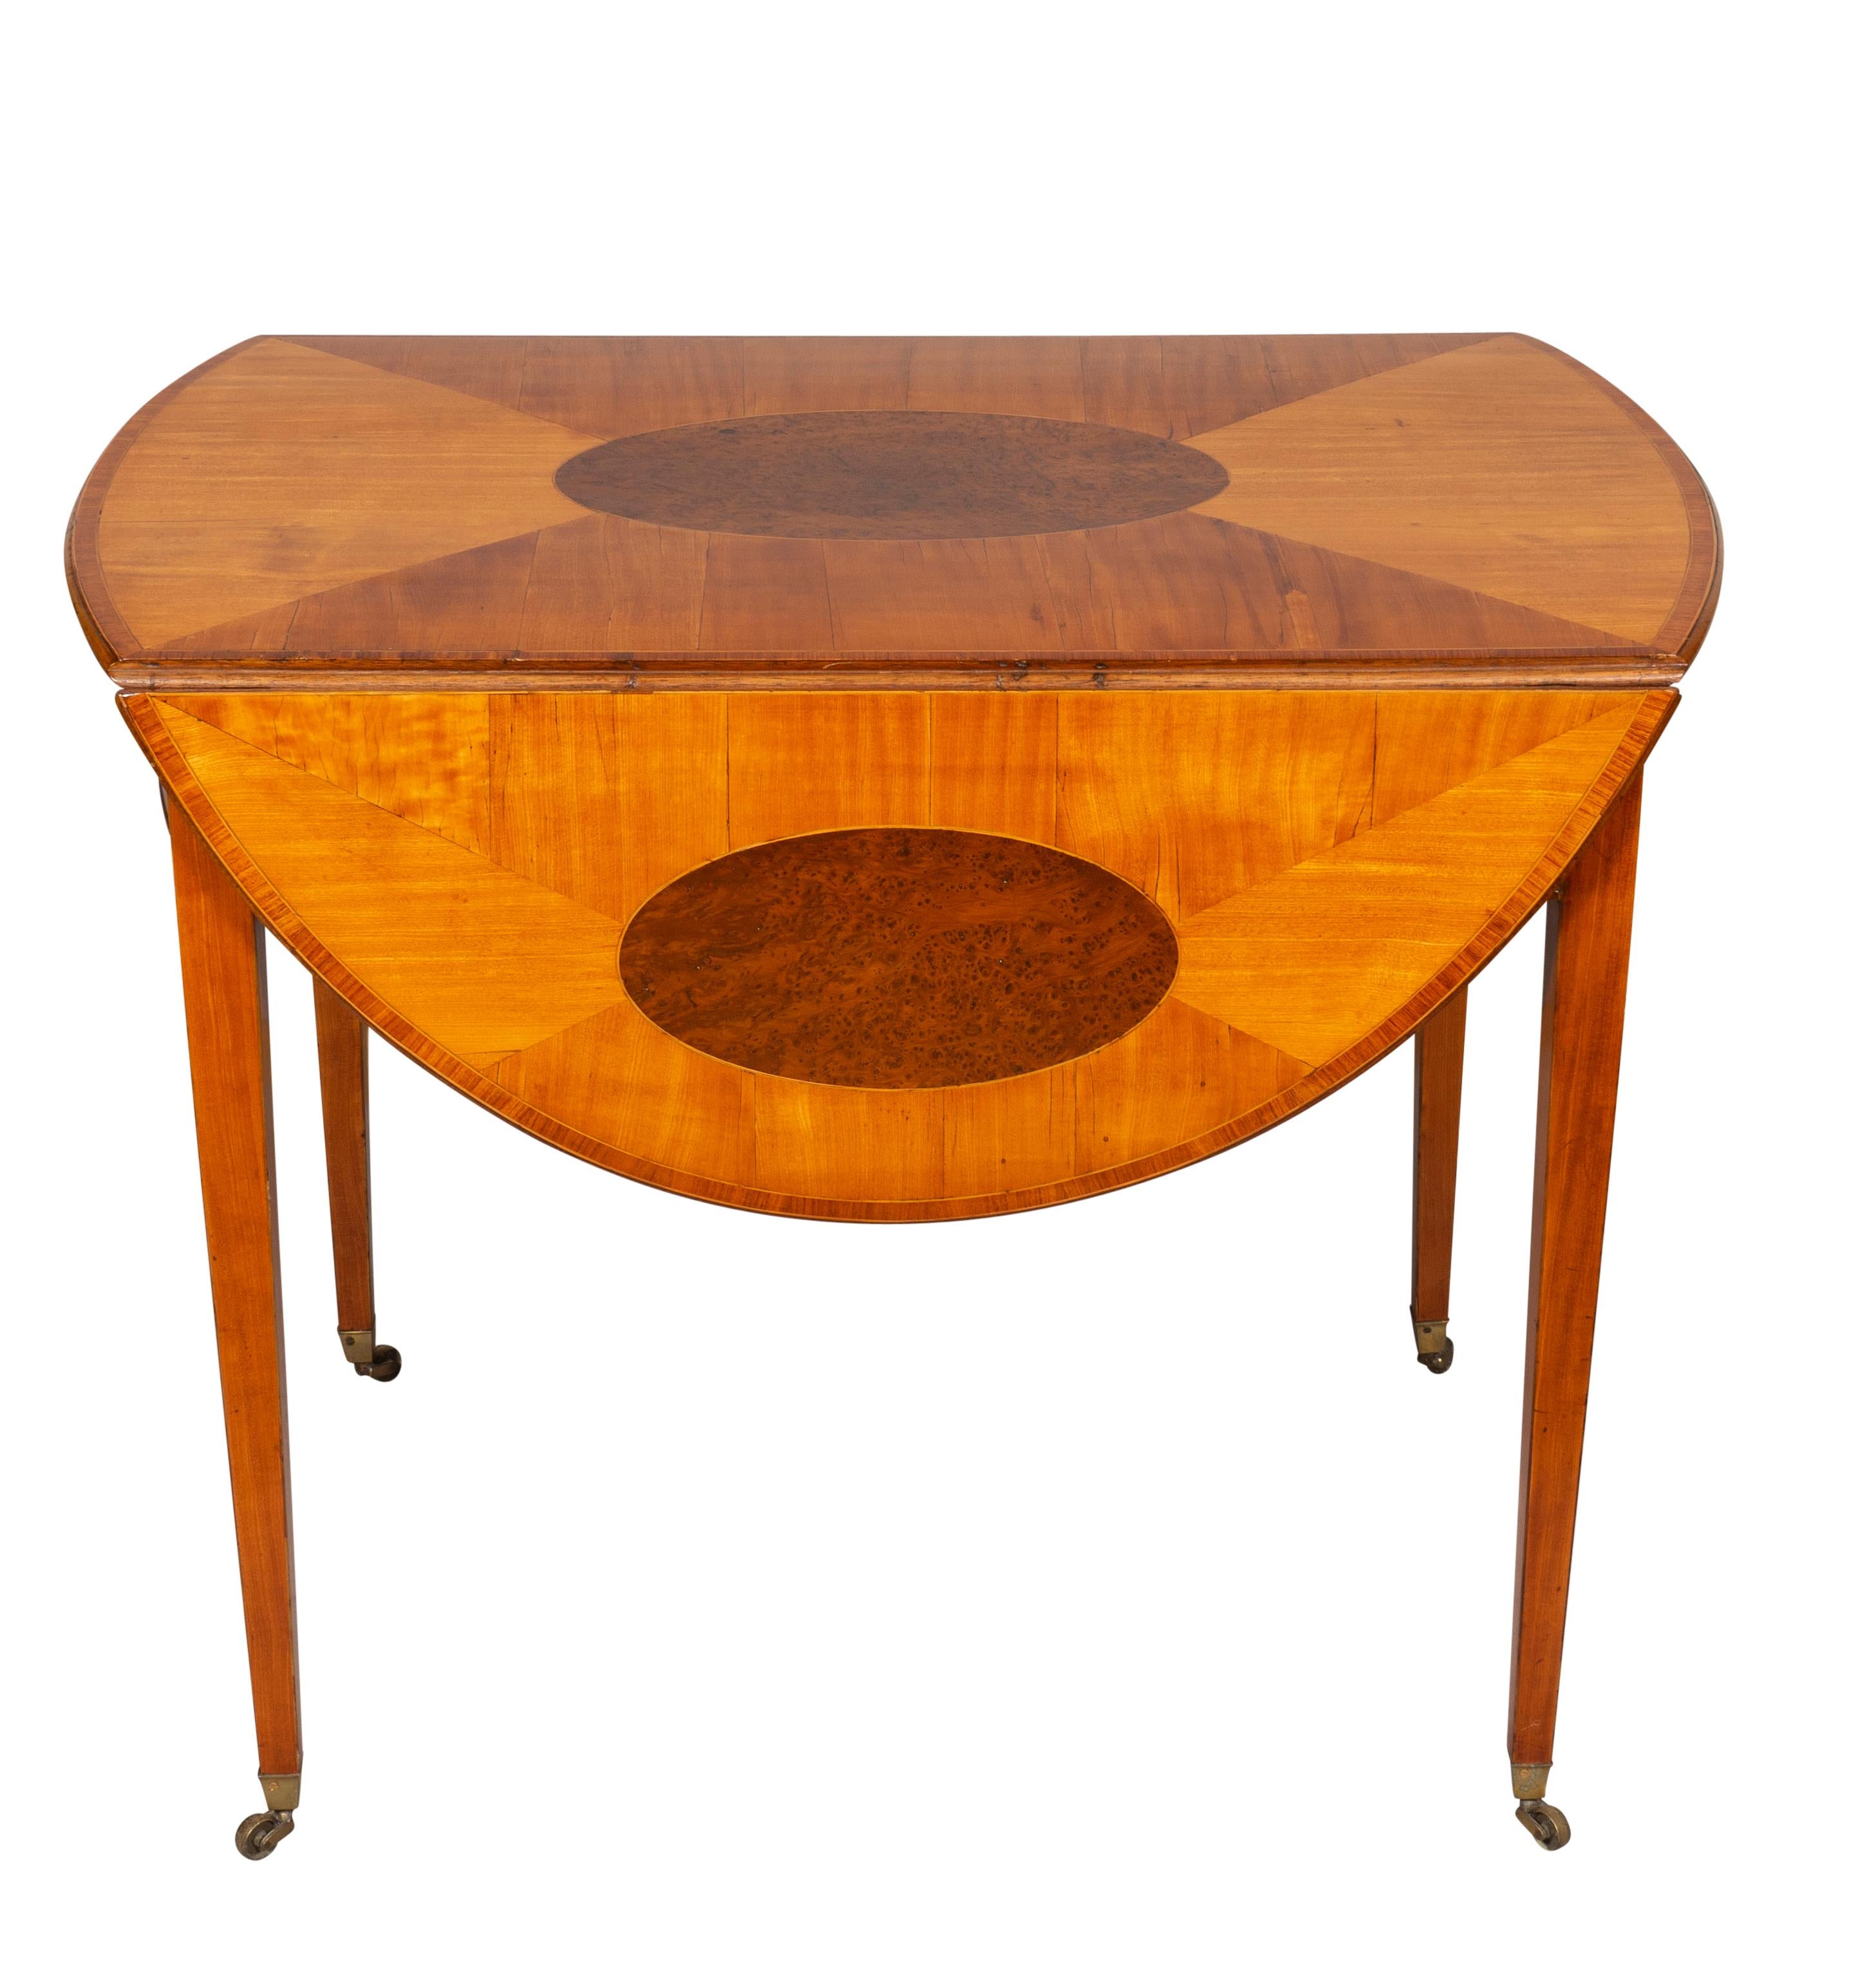 Rectangular top with D shaped hinged leaves, the center and leaves with oval inlay over a frieze containing a conforming drawer with a pair of brass handles and an opposing identical false drawer, raised on square tapered legs and casters.